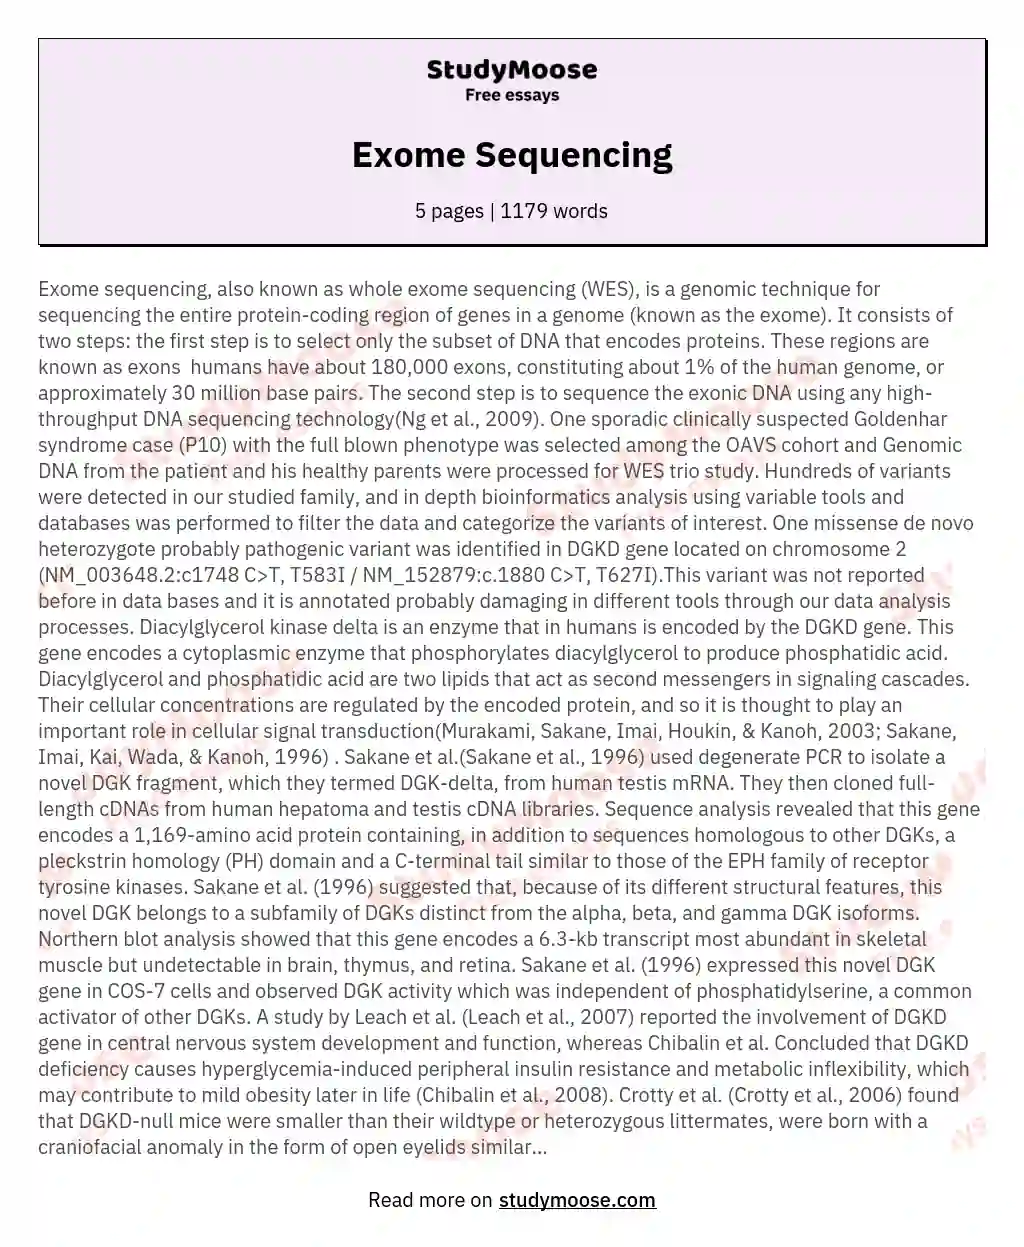 Exome Sequencing essay